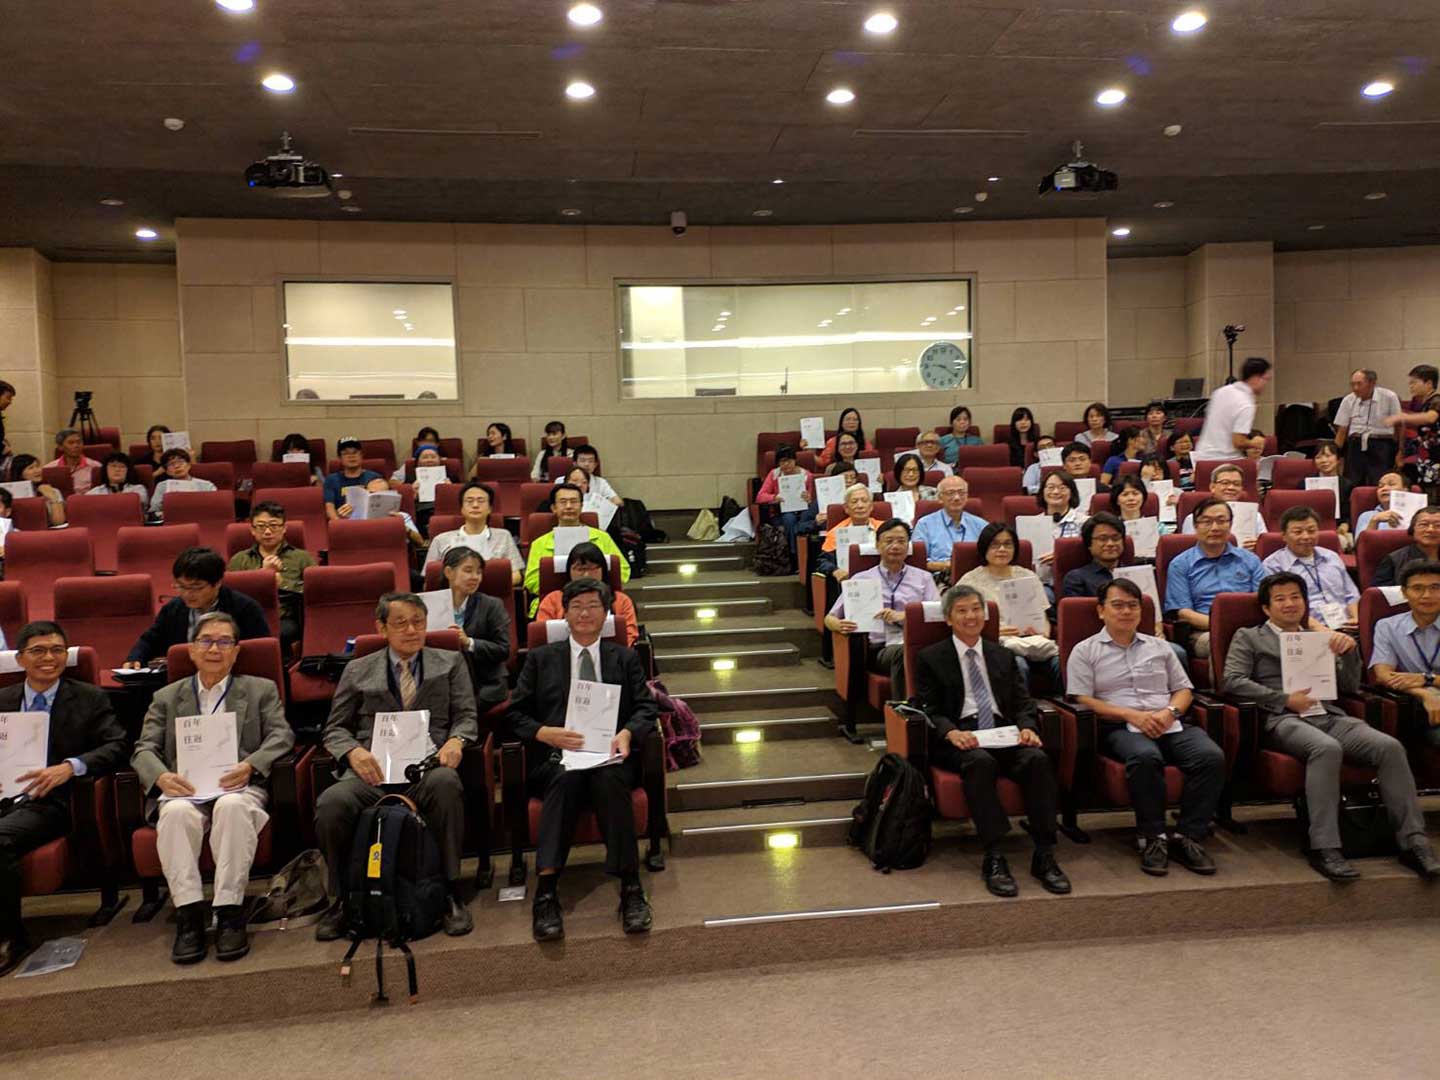 〔The Group photo of the opening of the seminar (Third on the left in the front row is Professor Xu Zheng-Guang, second on the left is Professor Watanabe Shino from Japan, first on the left is Yang Chang-Zhen, the Deputy Minister of the Hakka Affairs Council, first on the right is Chen Jun-Xun, the vice president of National Chiao Tung University, second on the right is Dean Huang Shao-Heng, third on the right is Associate Professor Hirohisa Kawai )〕